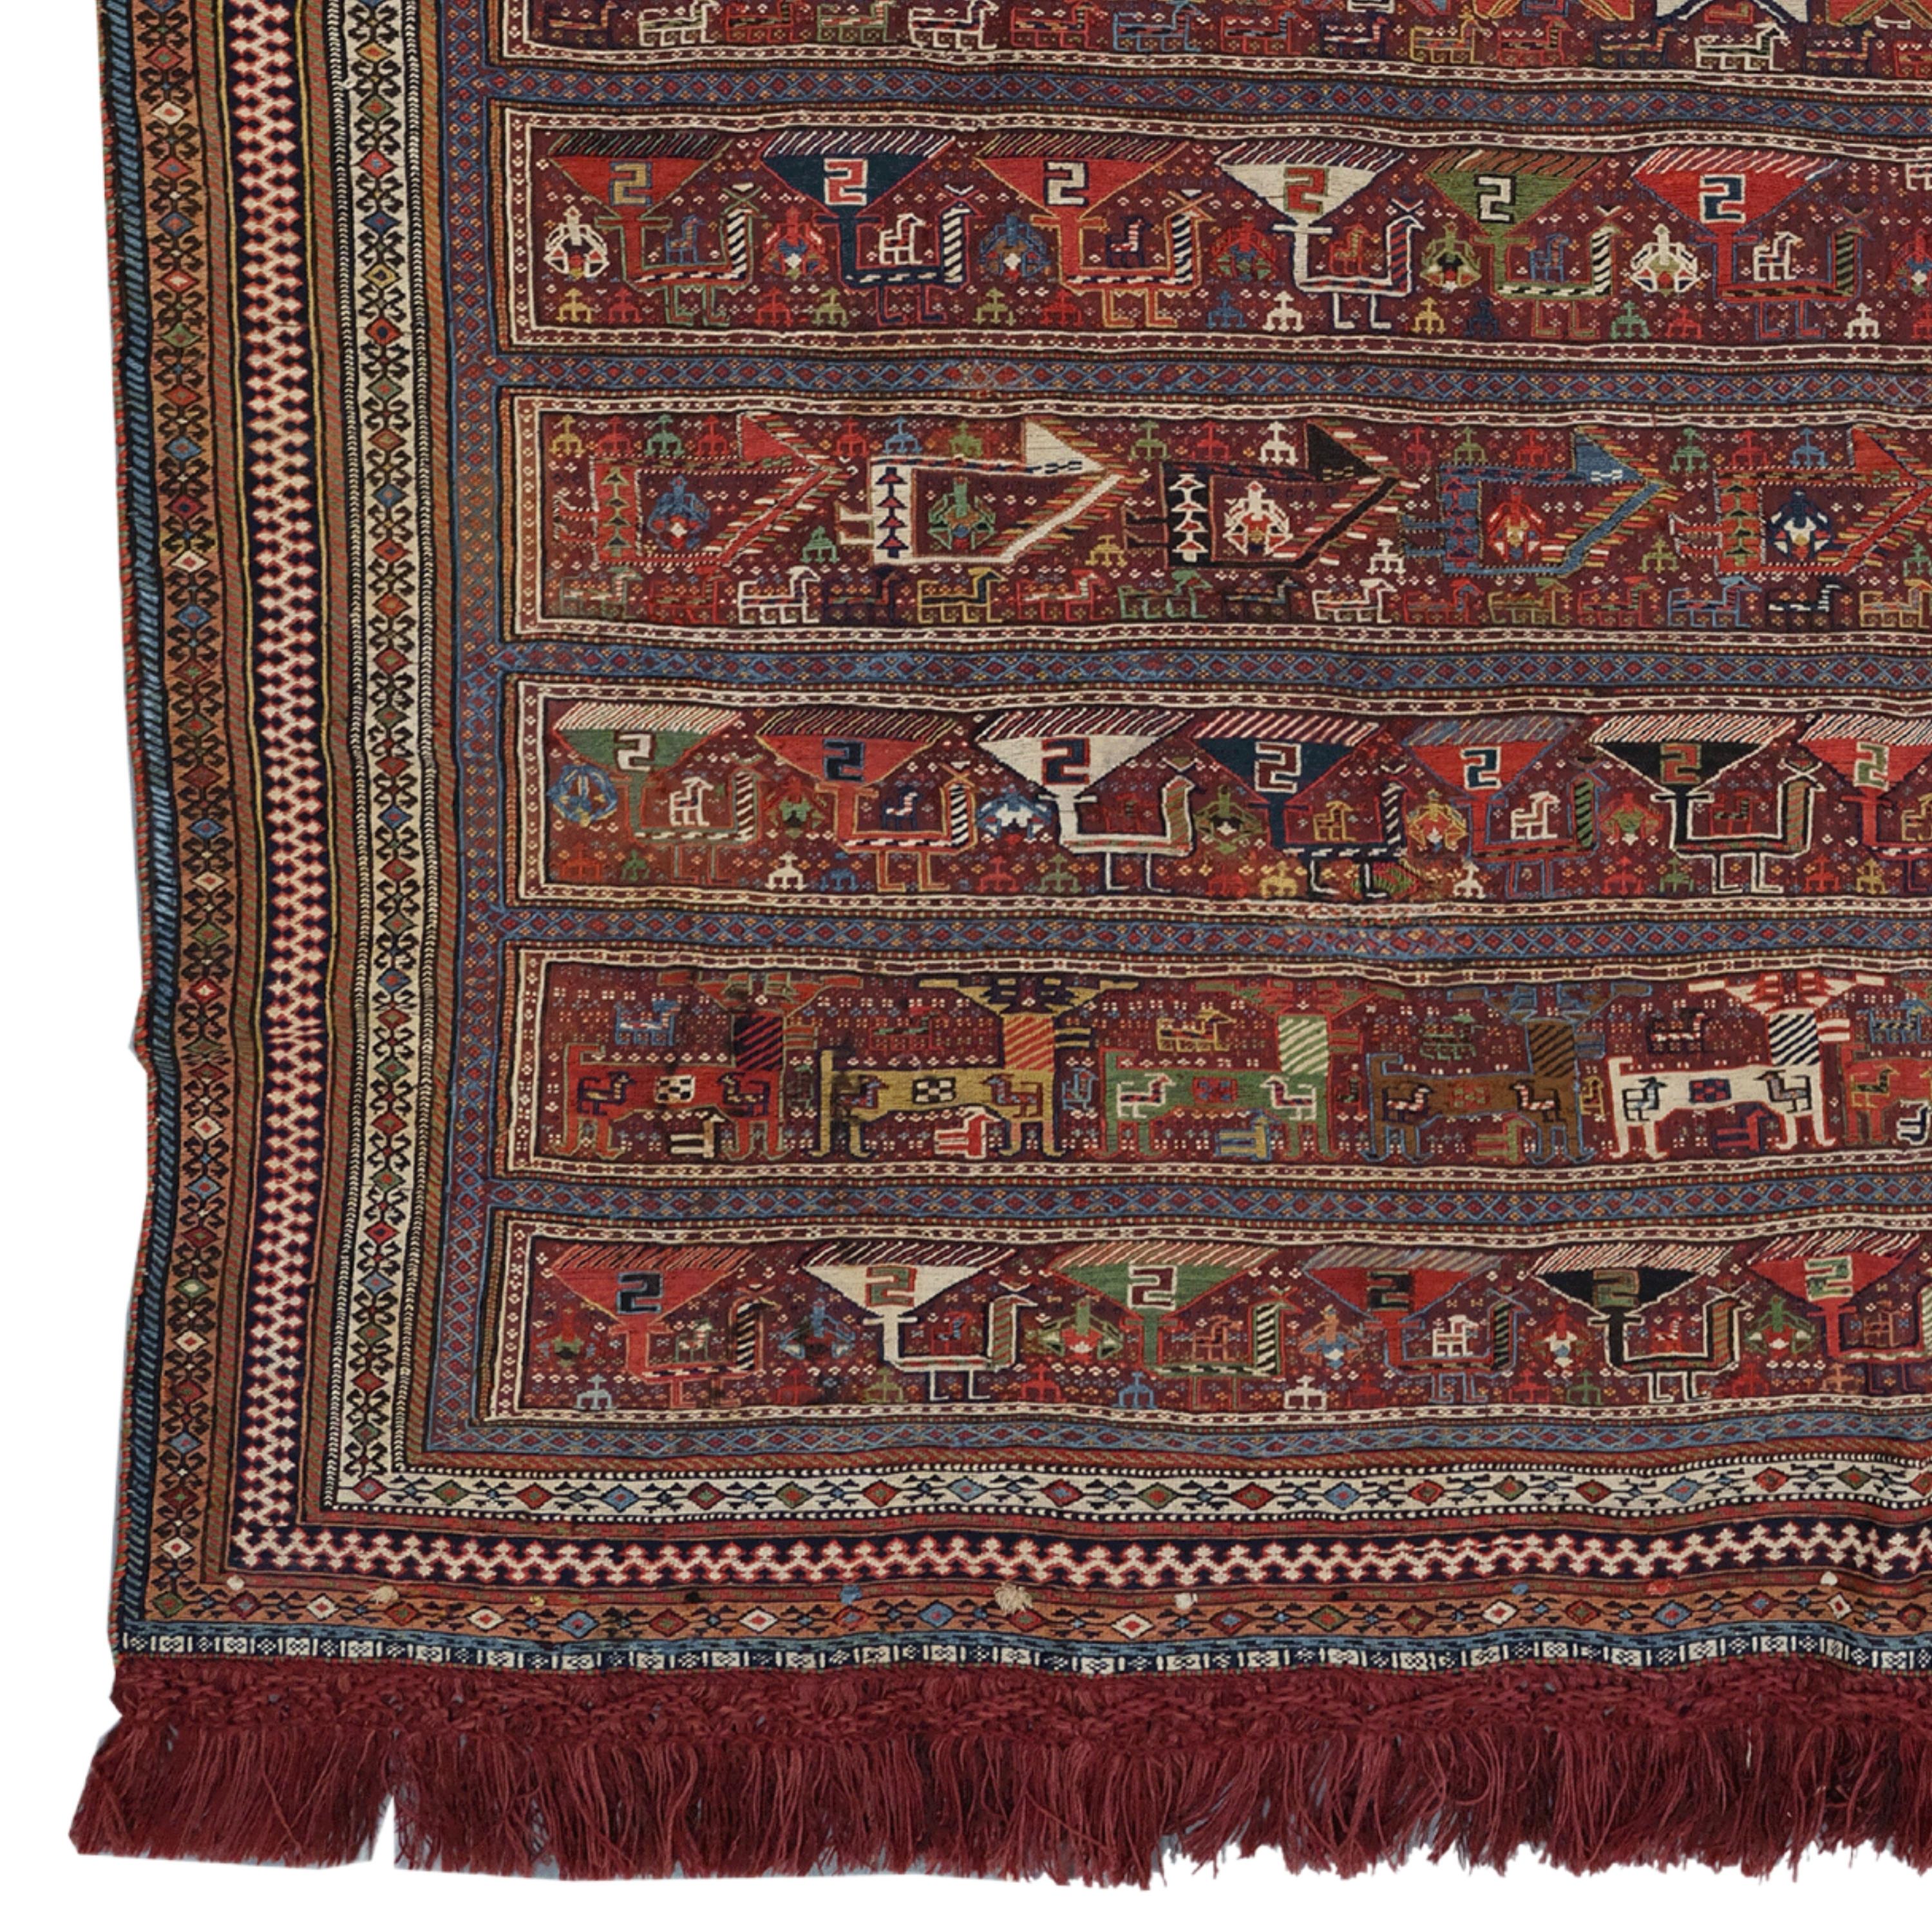 A QASHQAI HORSE COVER
Size: 148×155 cm

In the tribal cultures of Azerbaijan and the Caucasus, the flat-woven horse blanket (jol-i asb) has both ceremonial and practical purposes. As well as protecting horses from the cold, they soak up perspiration